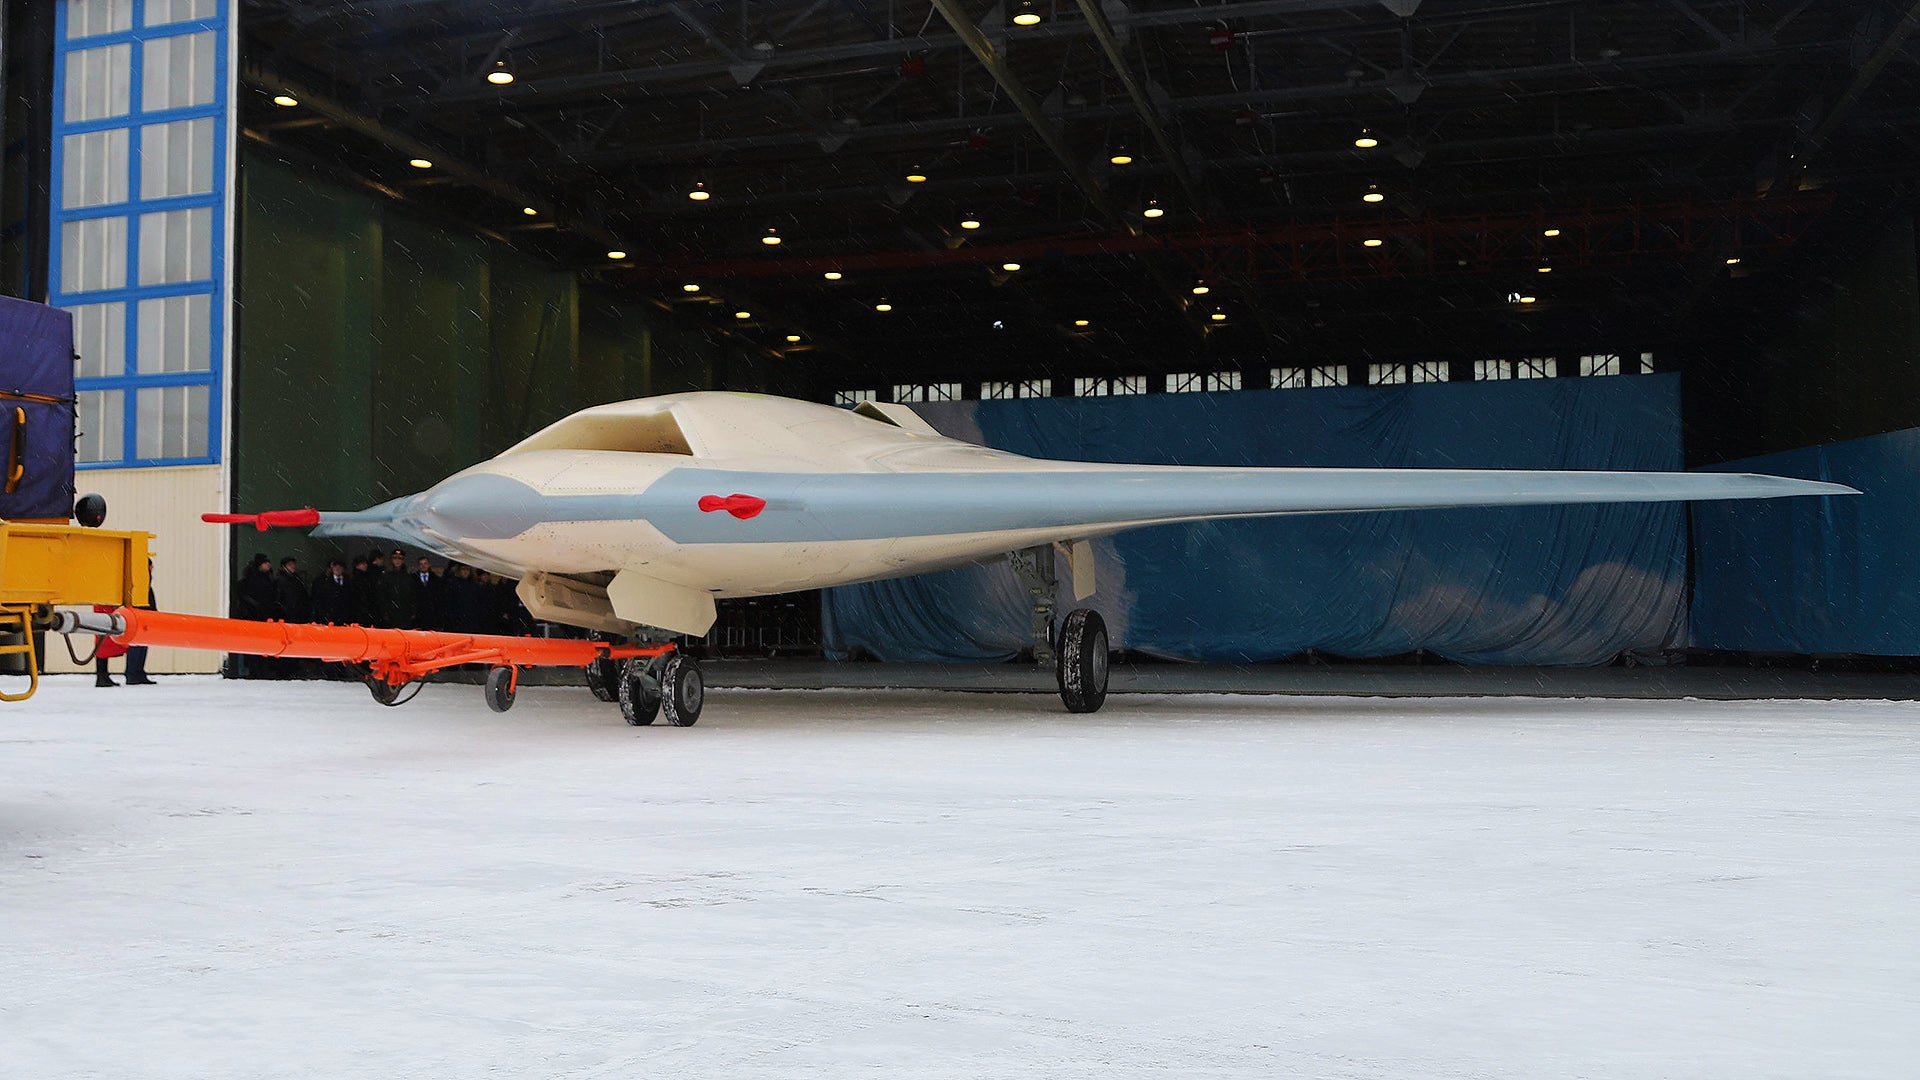 https://www.thedrive.com/content/2021/12/RUSSIA-S70-Hunter-UCAV.jpg?quality=85&amp;width=1920&amp;quality=70